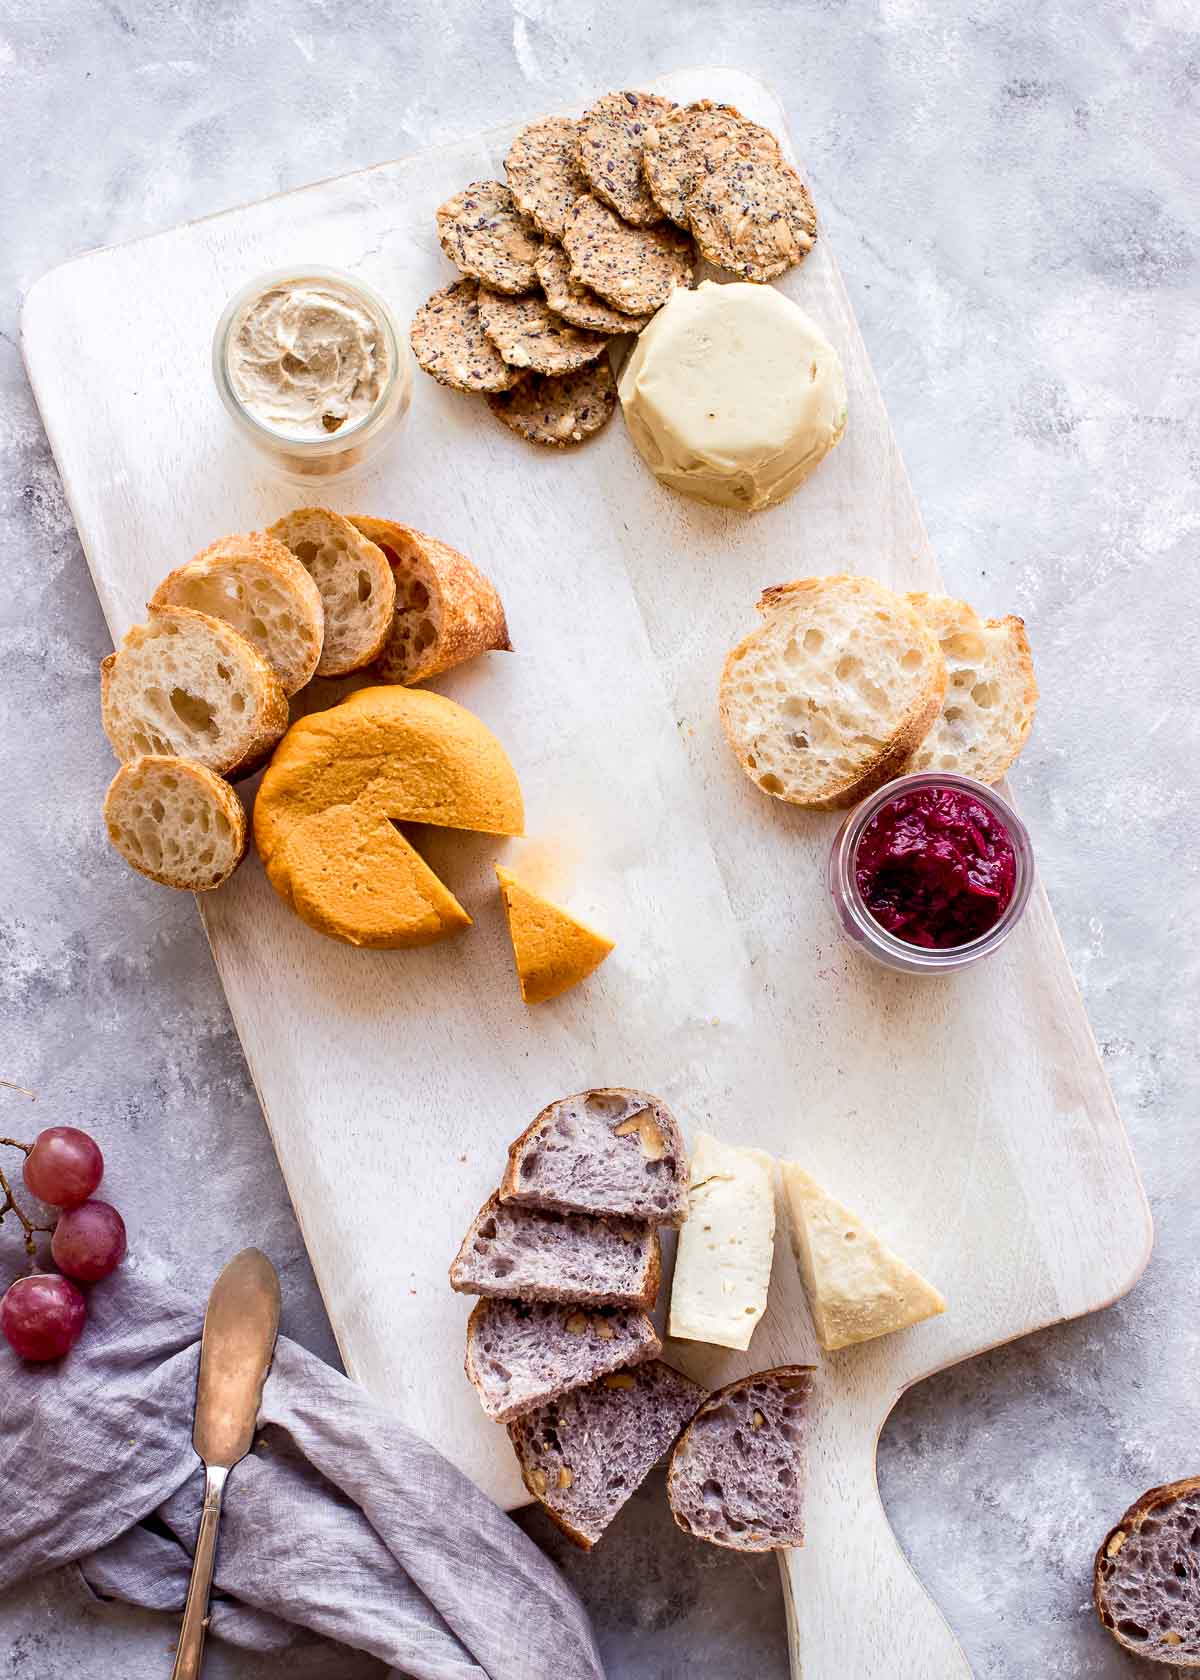 Section of vegan cheese board showing artisan cheeses with crackers and bread fanned out around them.